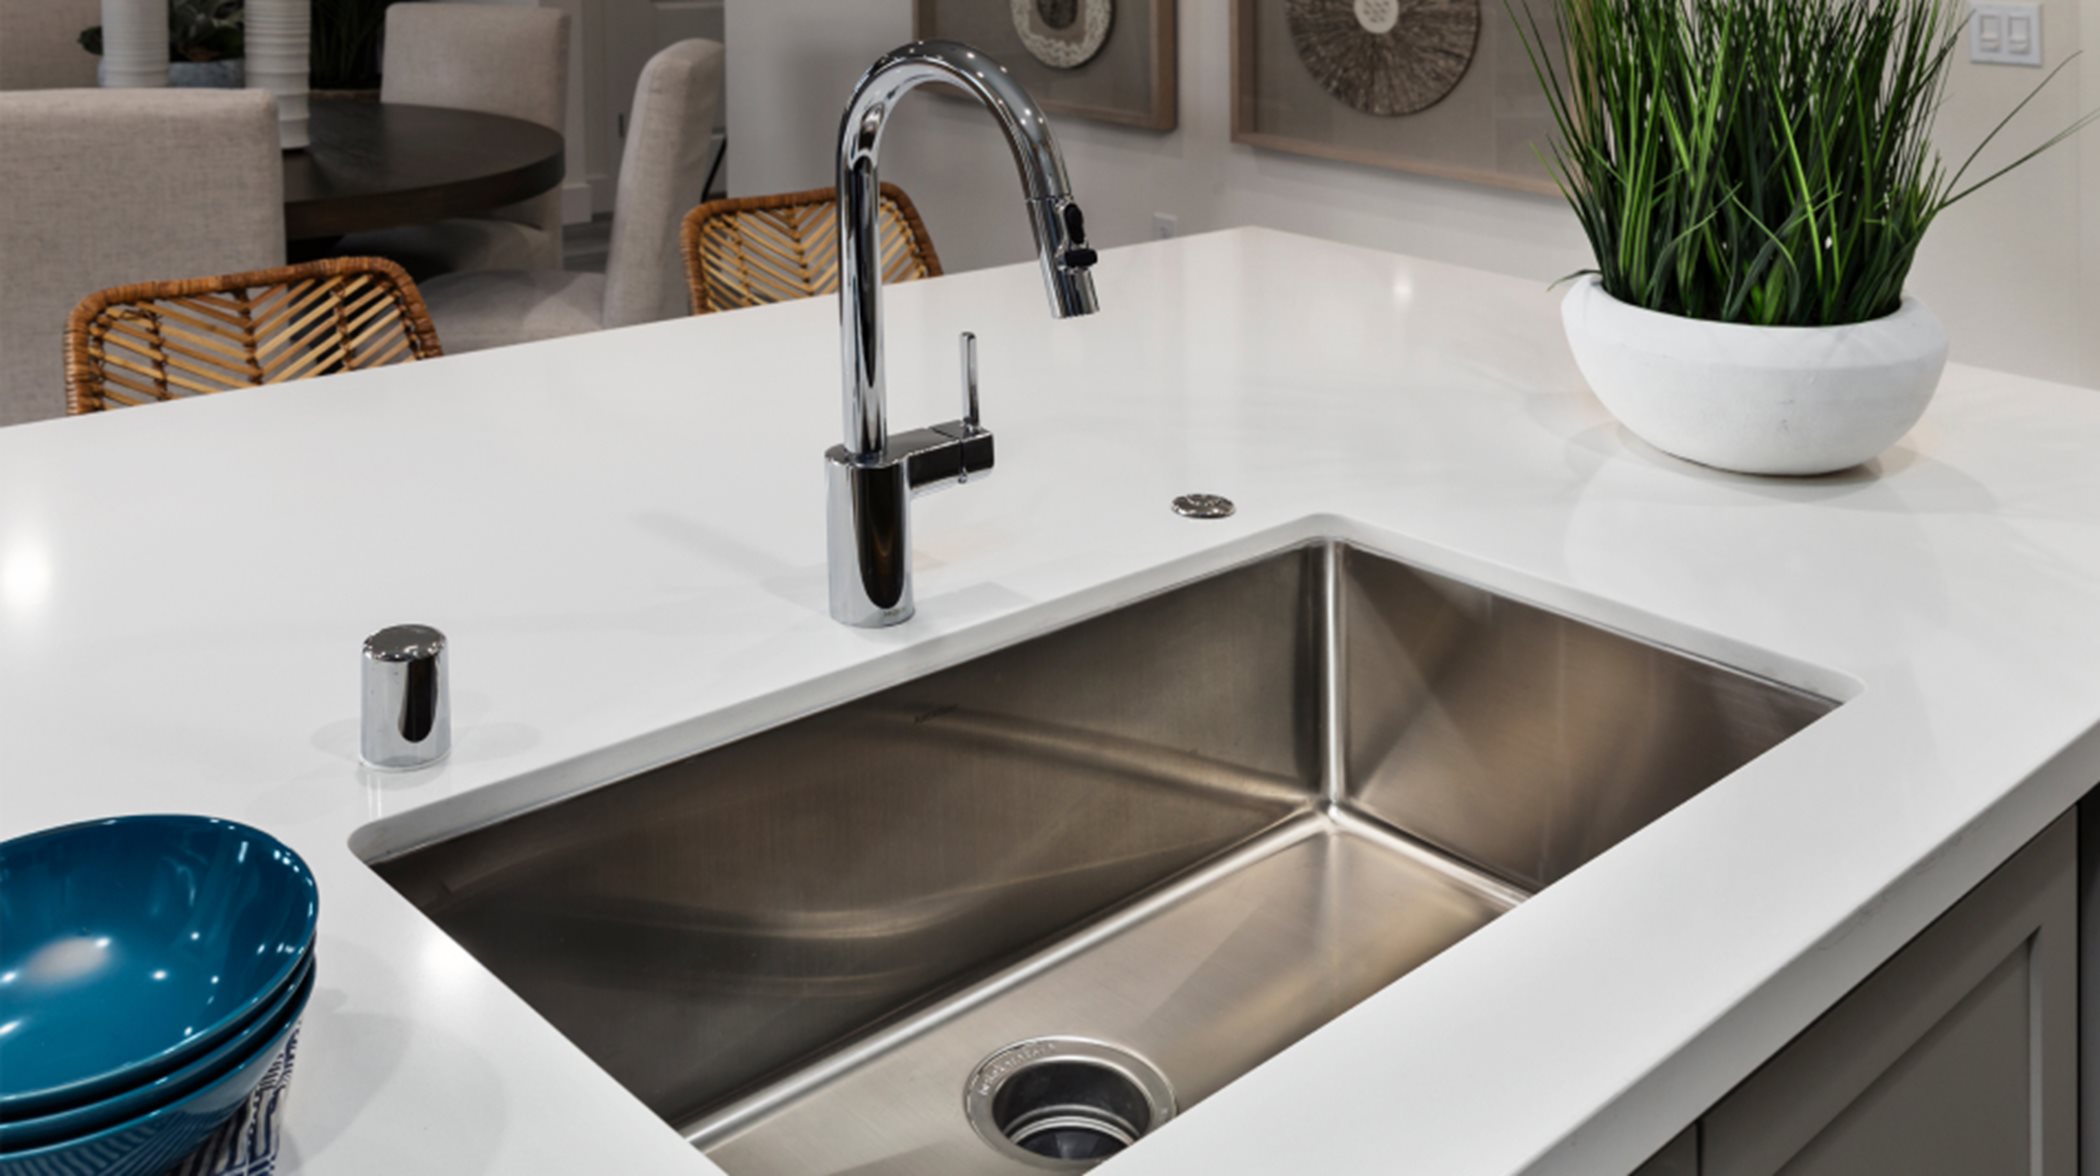 Undermount sinks and faucet